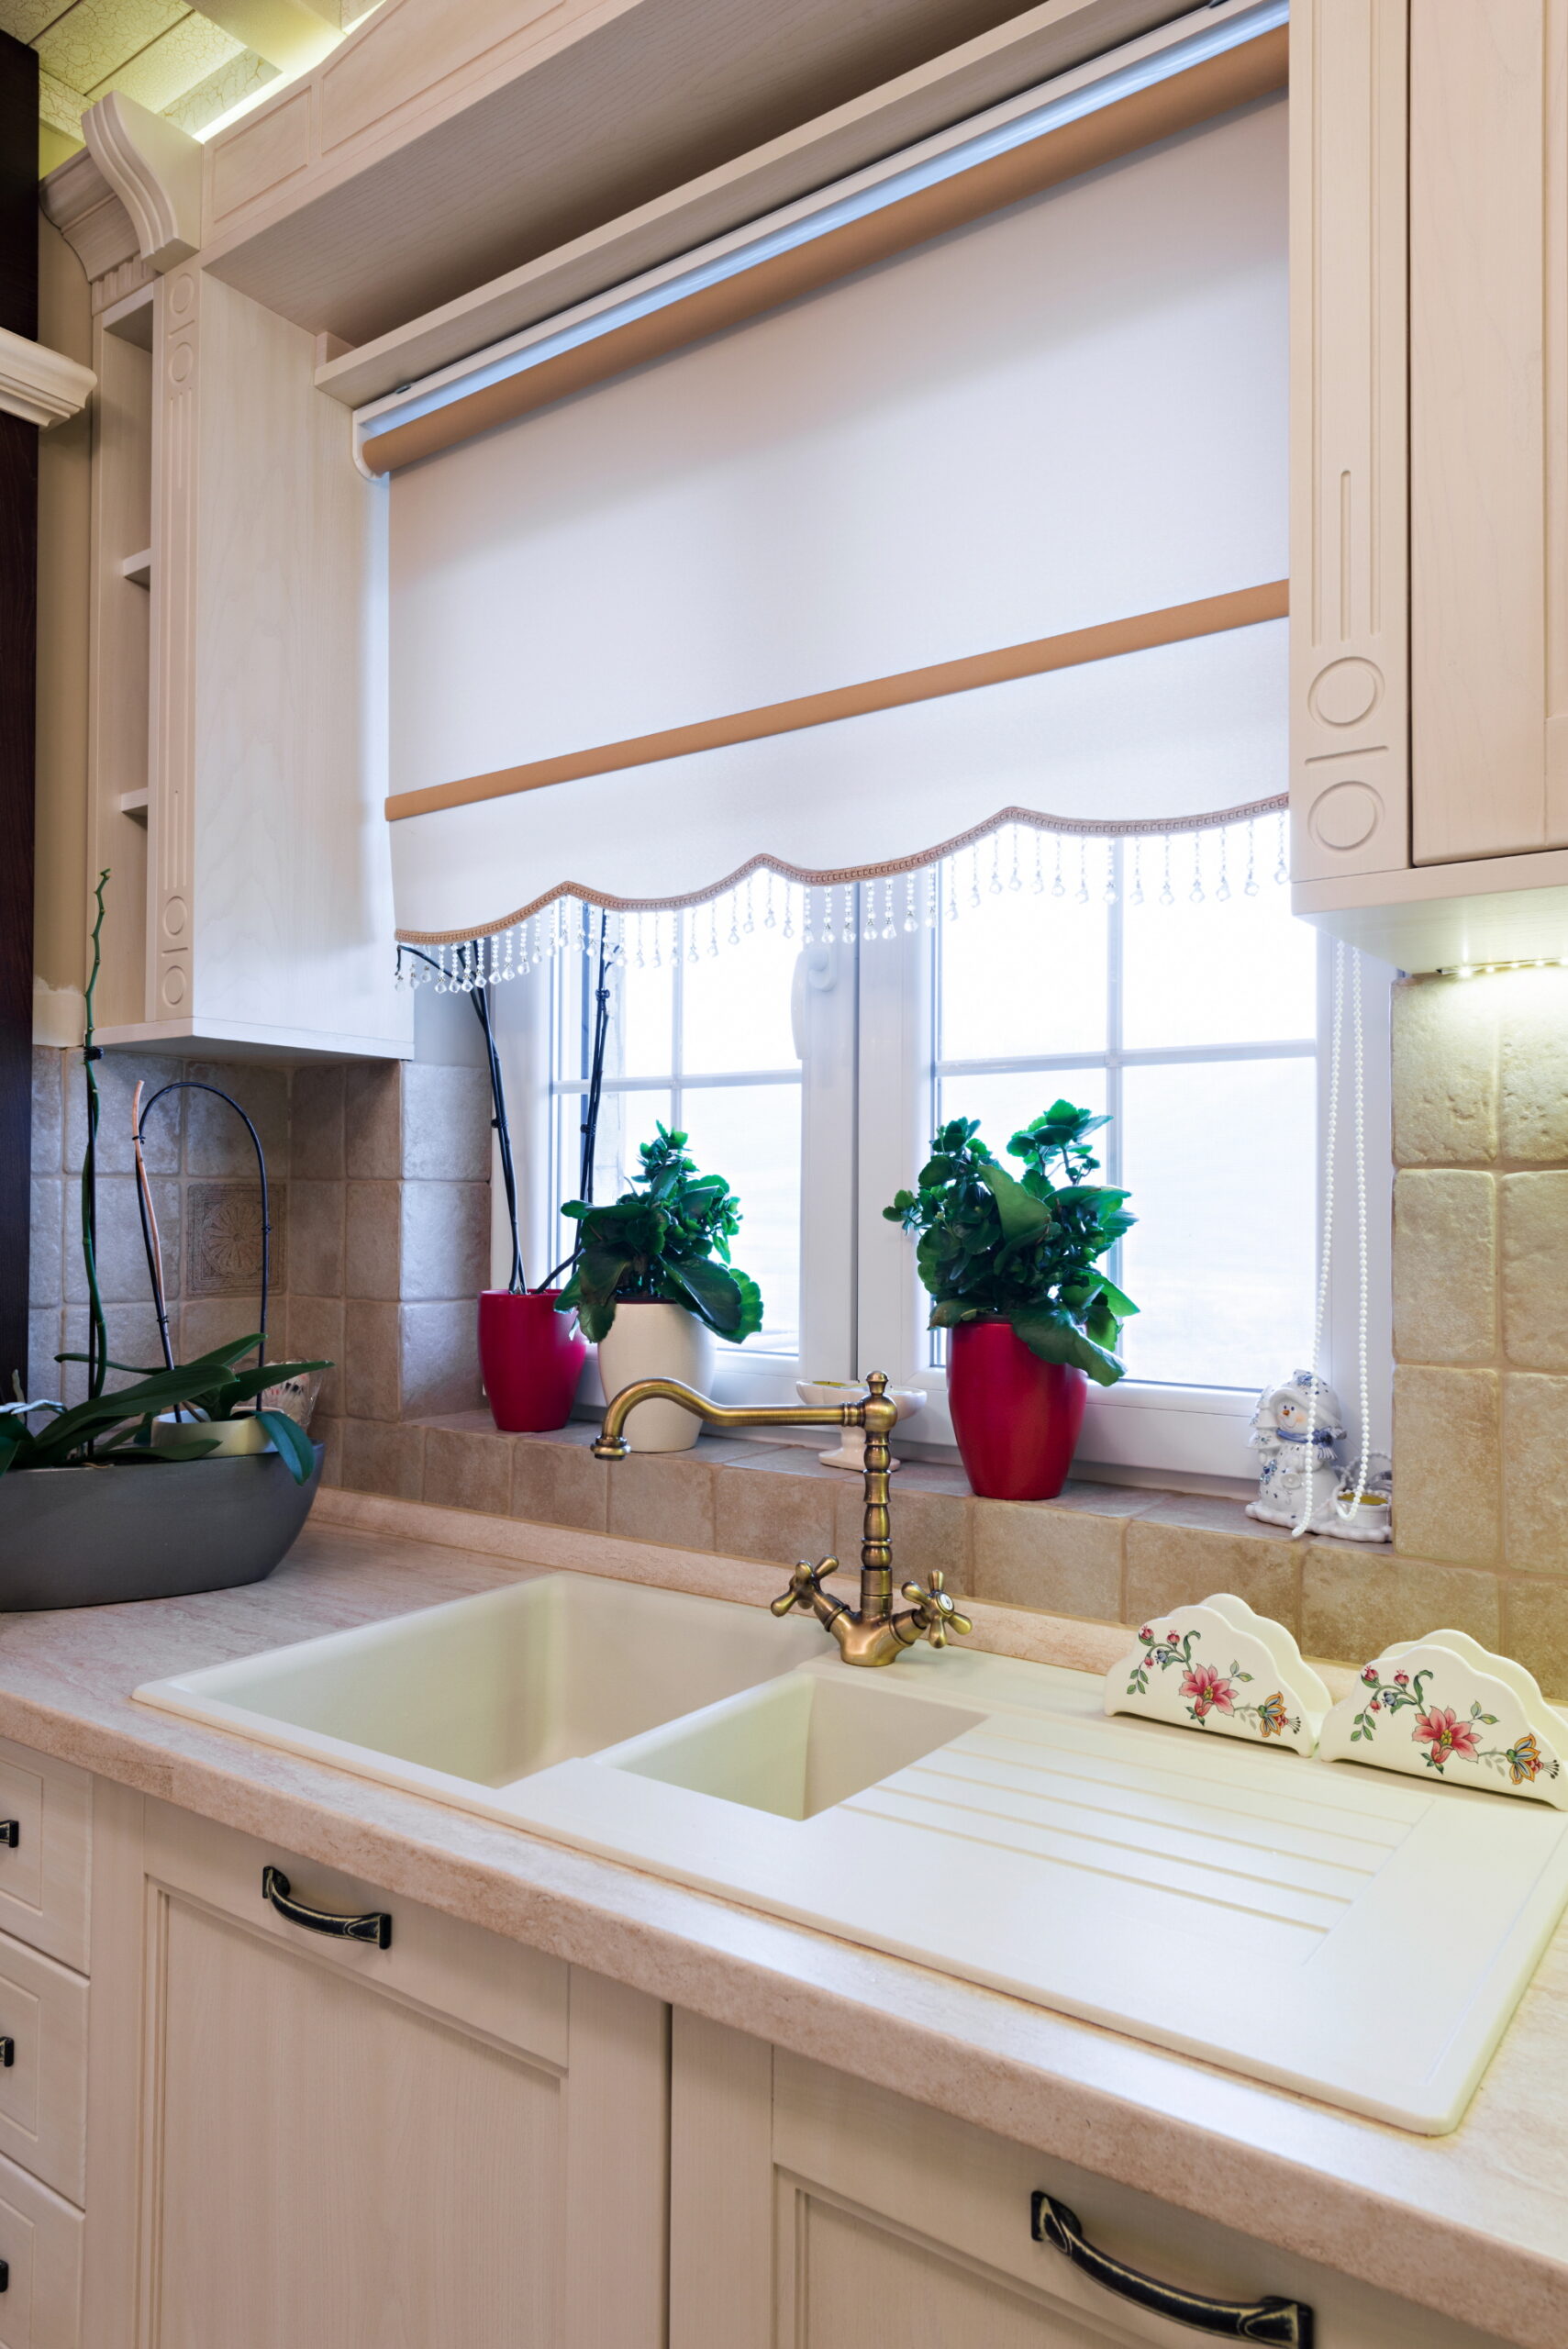 Use sheer curtains, plants, and mirrors in your kitchen to amplify natural light.